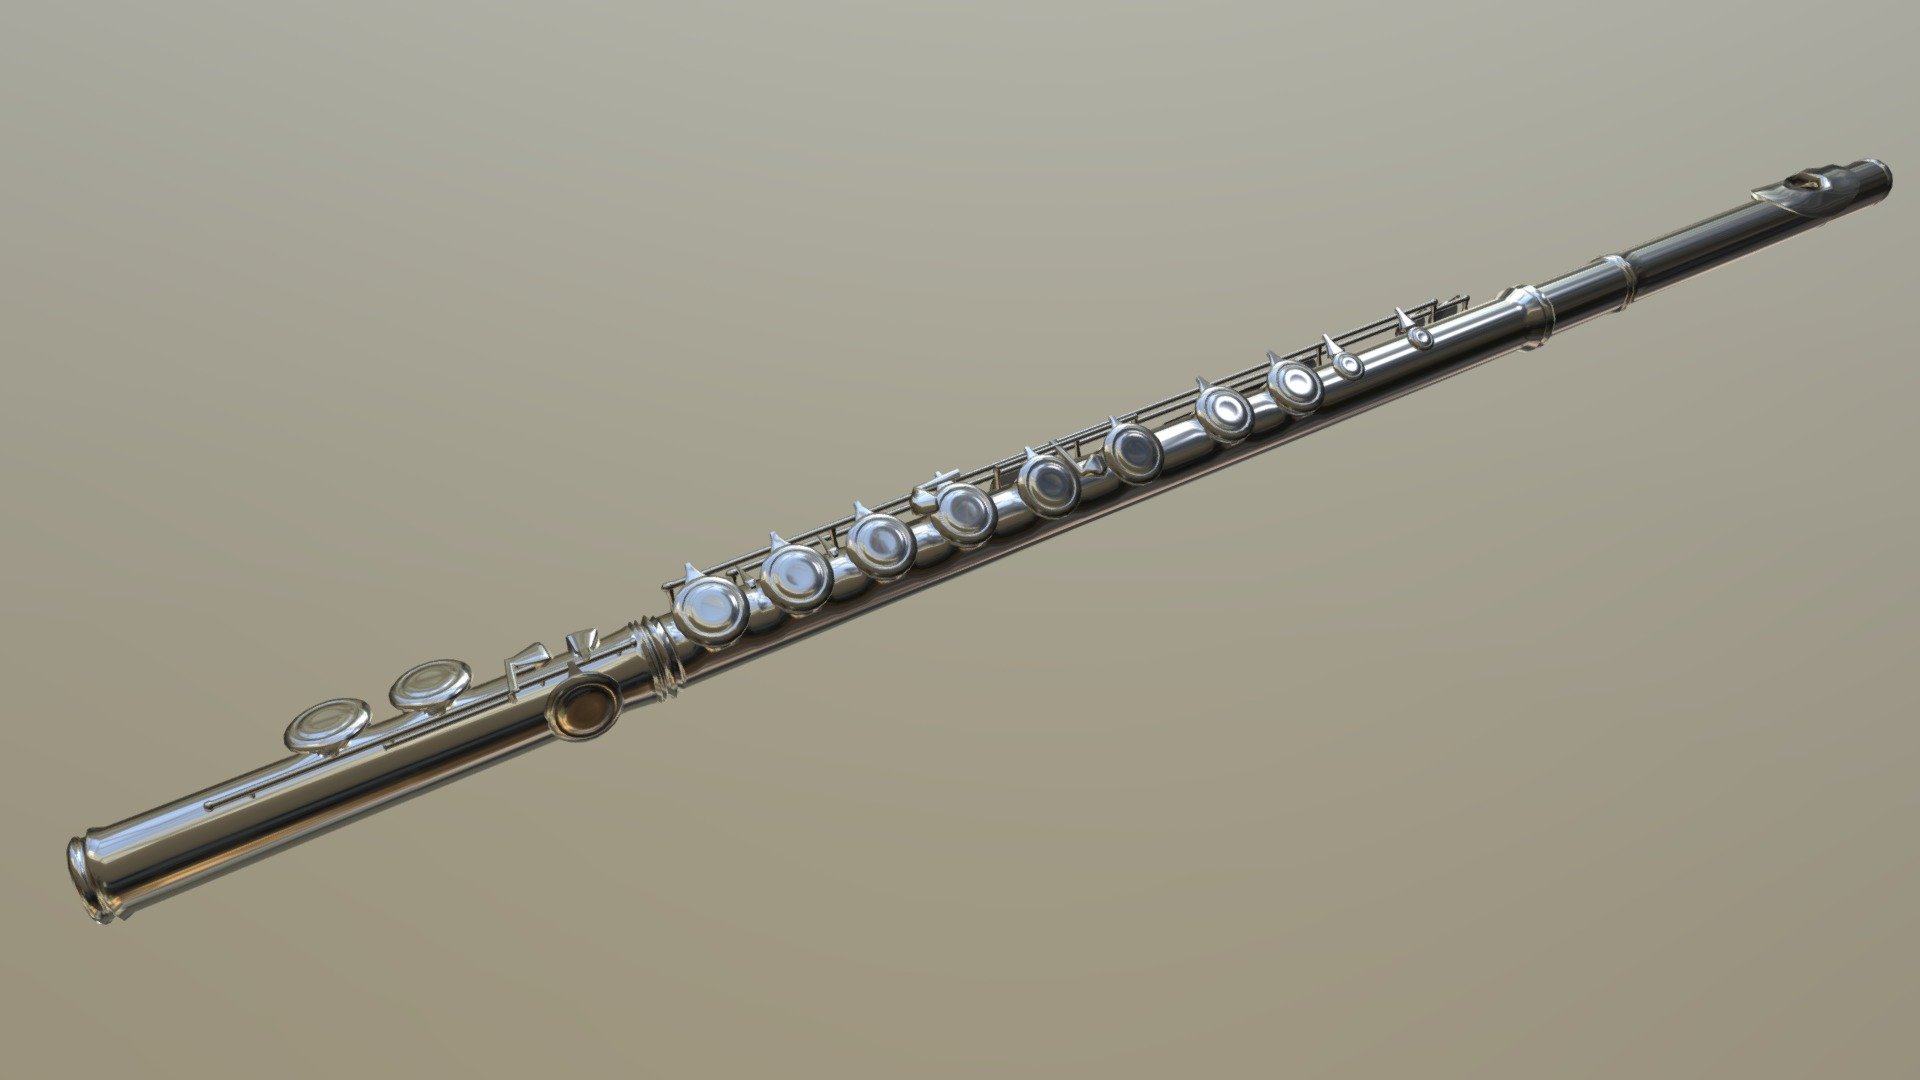 Dug this up from my files, forgot to upload it - Flute - 3D model by Selvyn (@selvynbell) 3d model